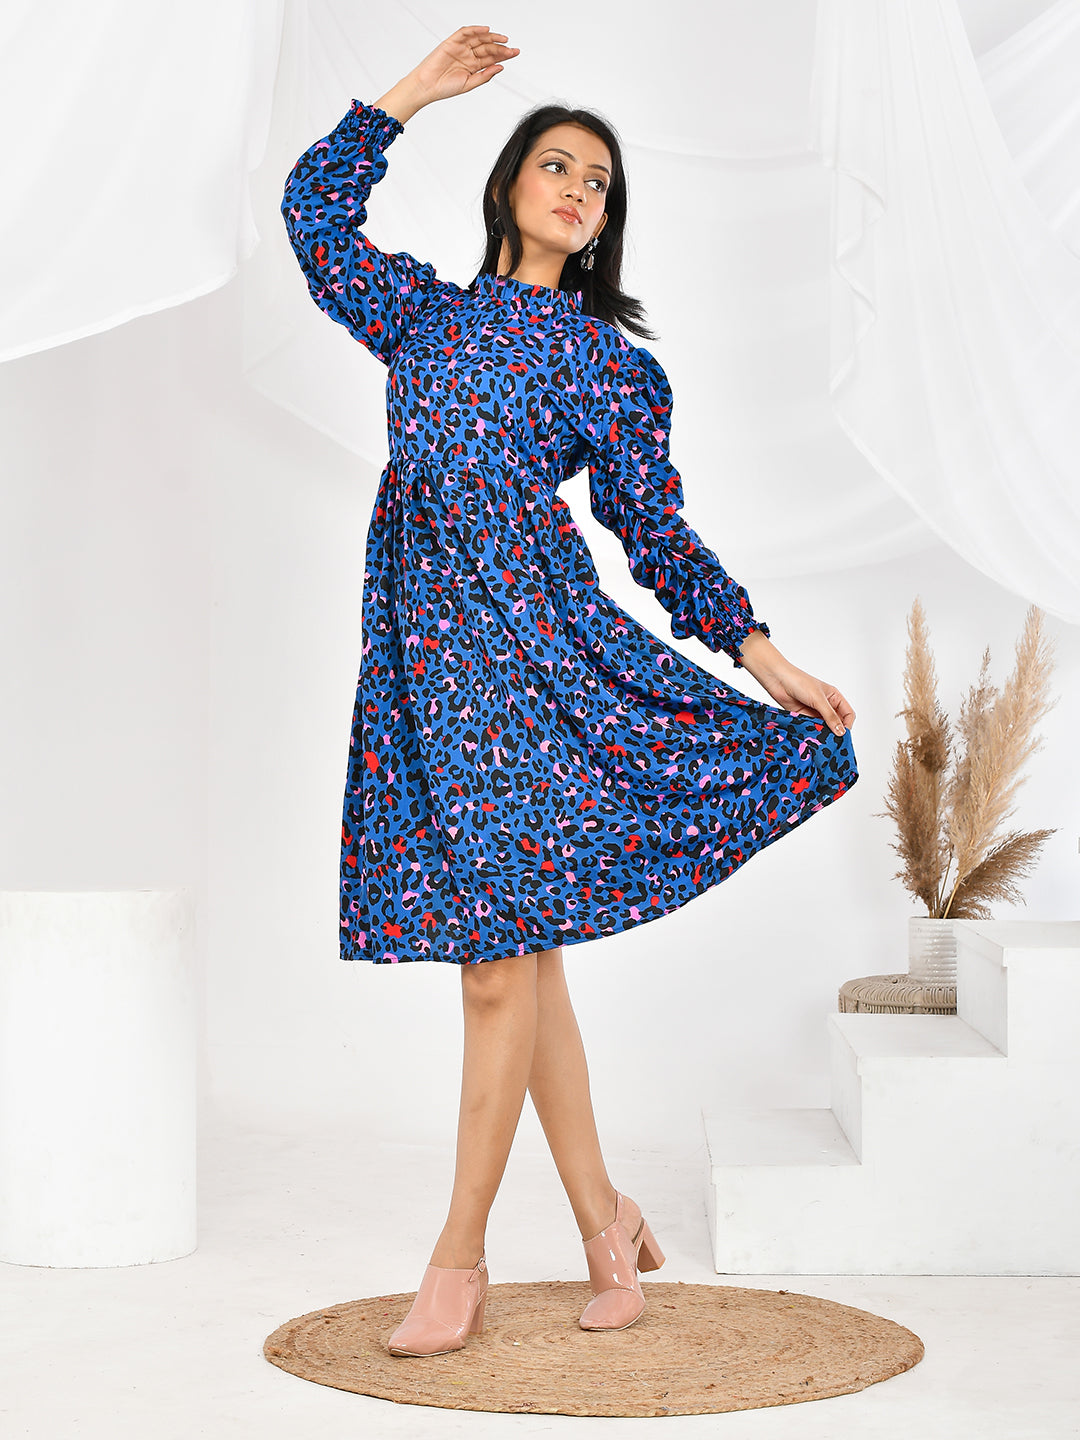 The beautiful blue print adds a touch of elegance and sophistication, while the comfortable fit ensures you'll look and feel your best. Upgrade your wardrobe with our must-have dresses today.